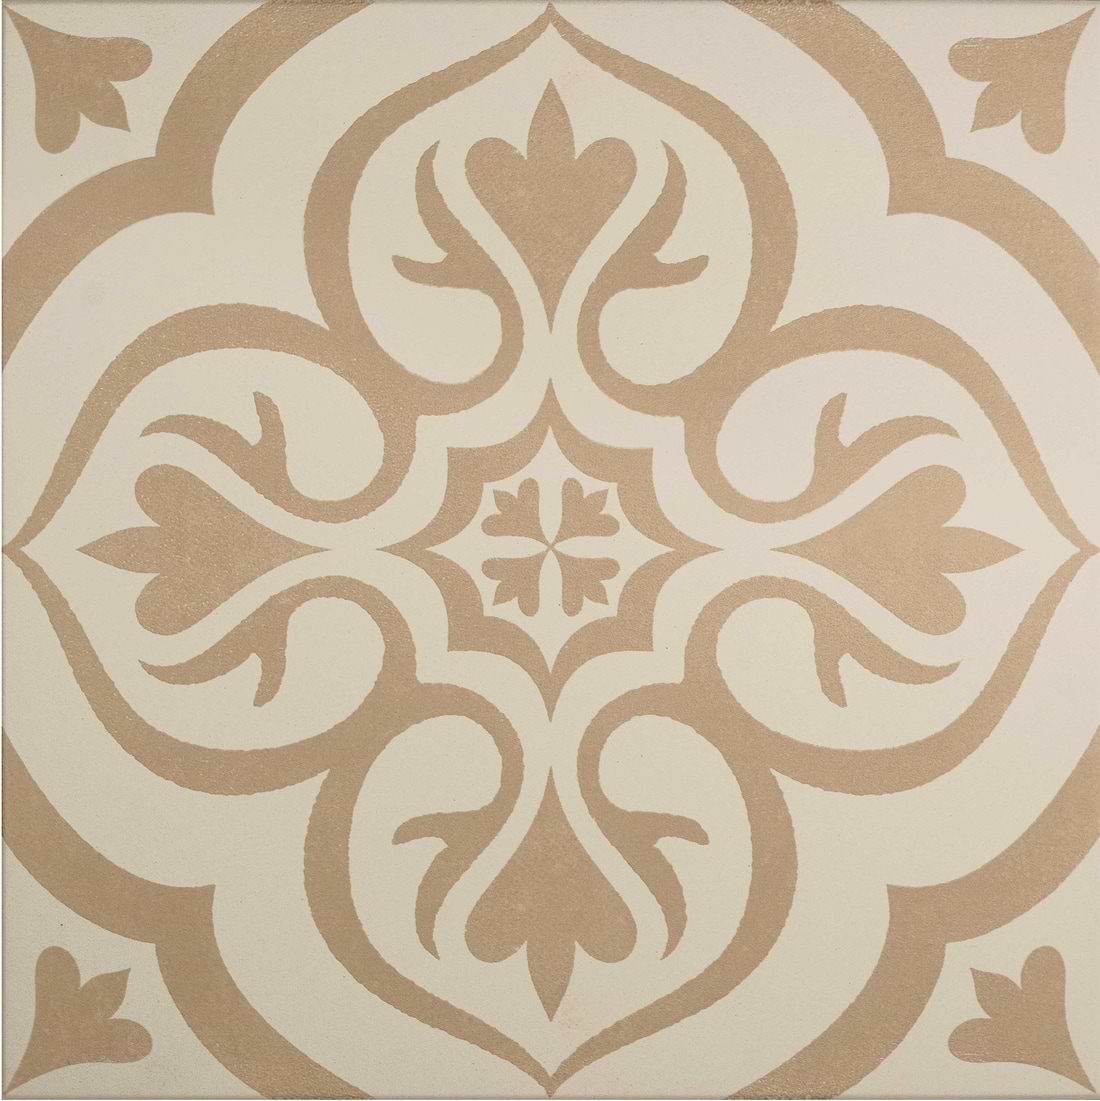 Knightshayes Taupe on Chalk - Hyperion Tiles